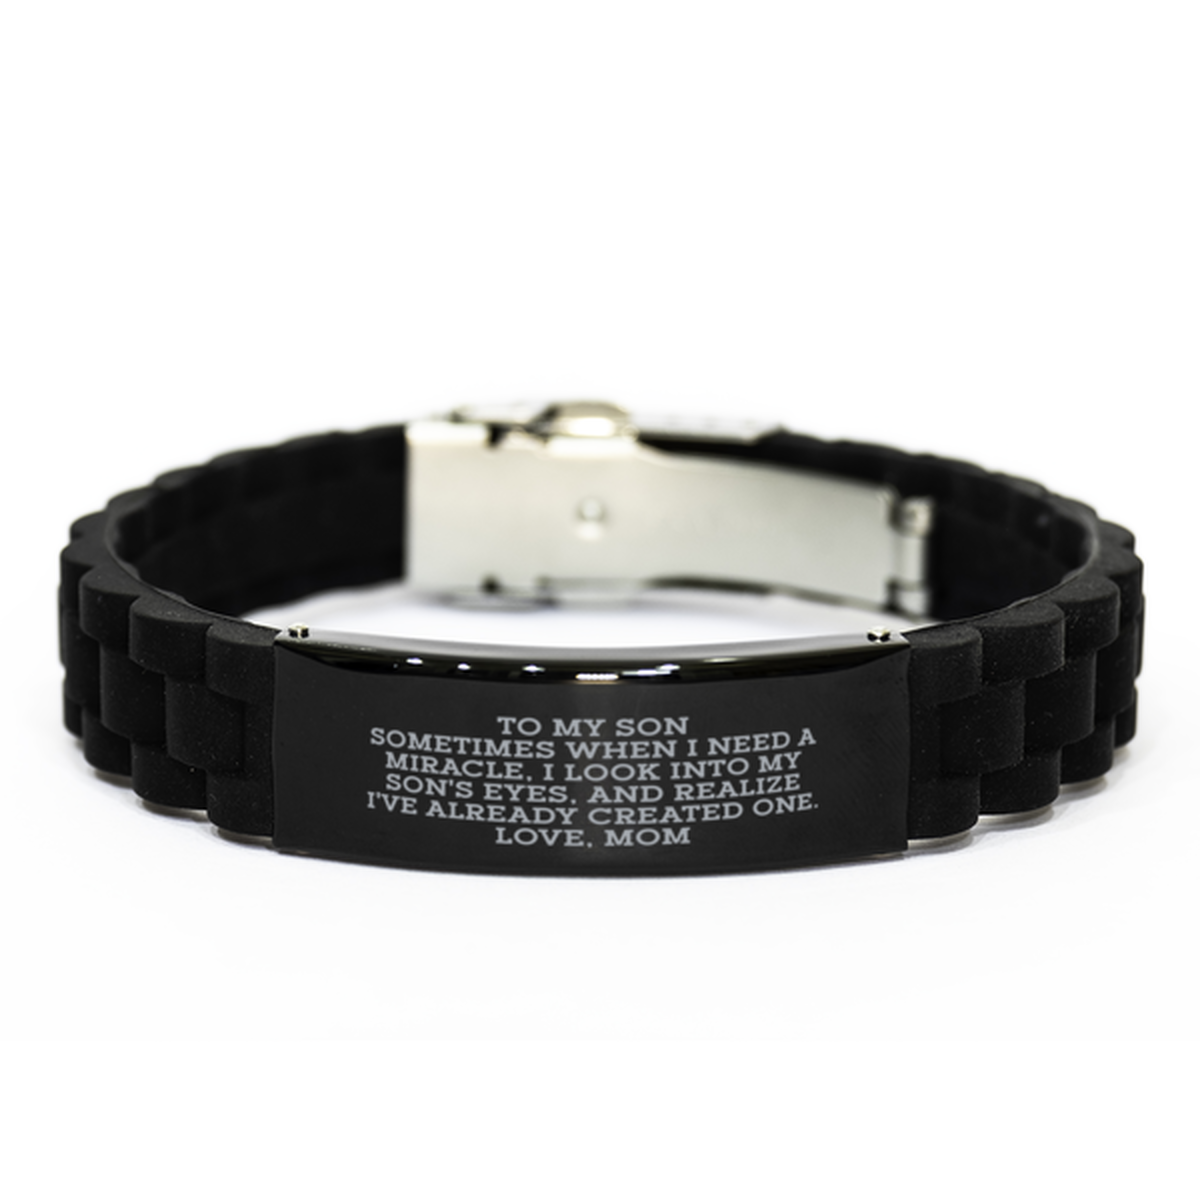 To My Son Black Bracelet, Sometimes When I Need A Miracle, Graduation Day Gifts For Son From Mom, Birthday Gifts For Men